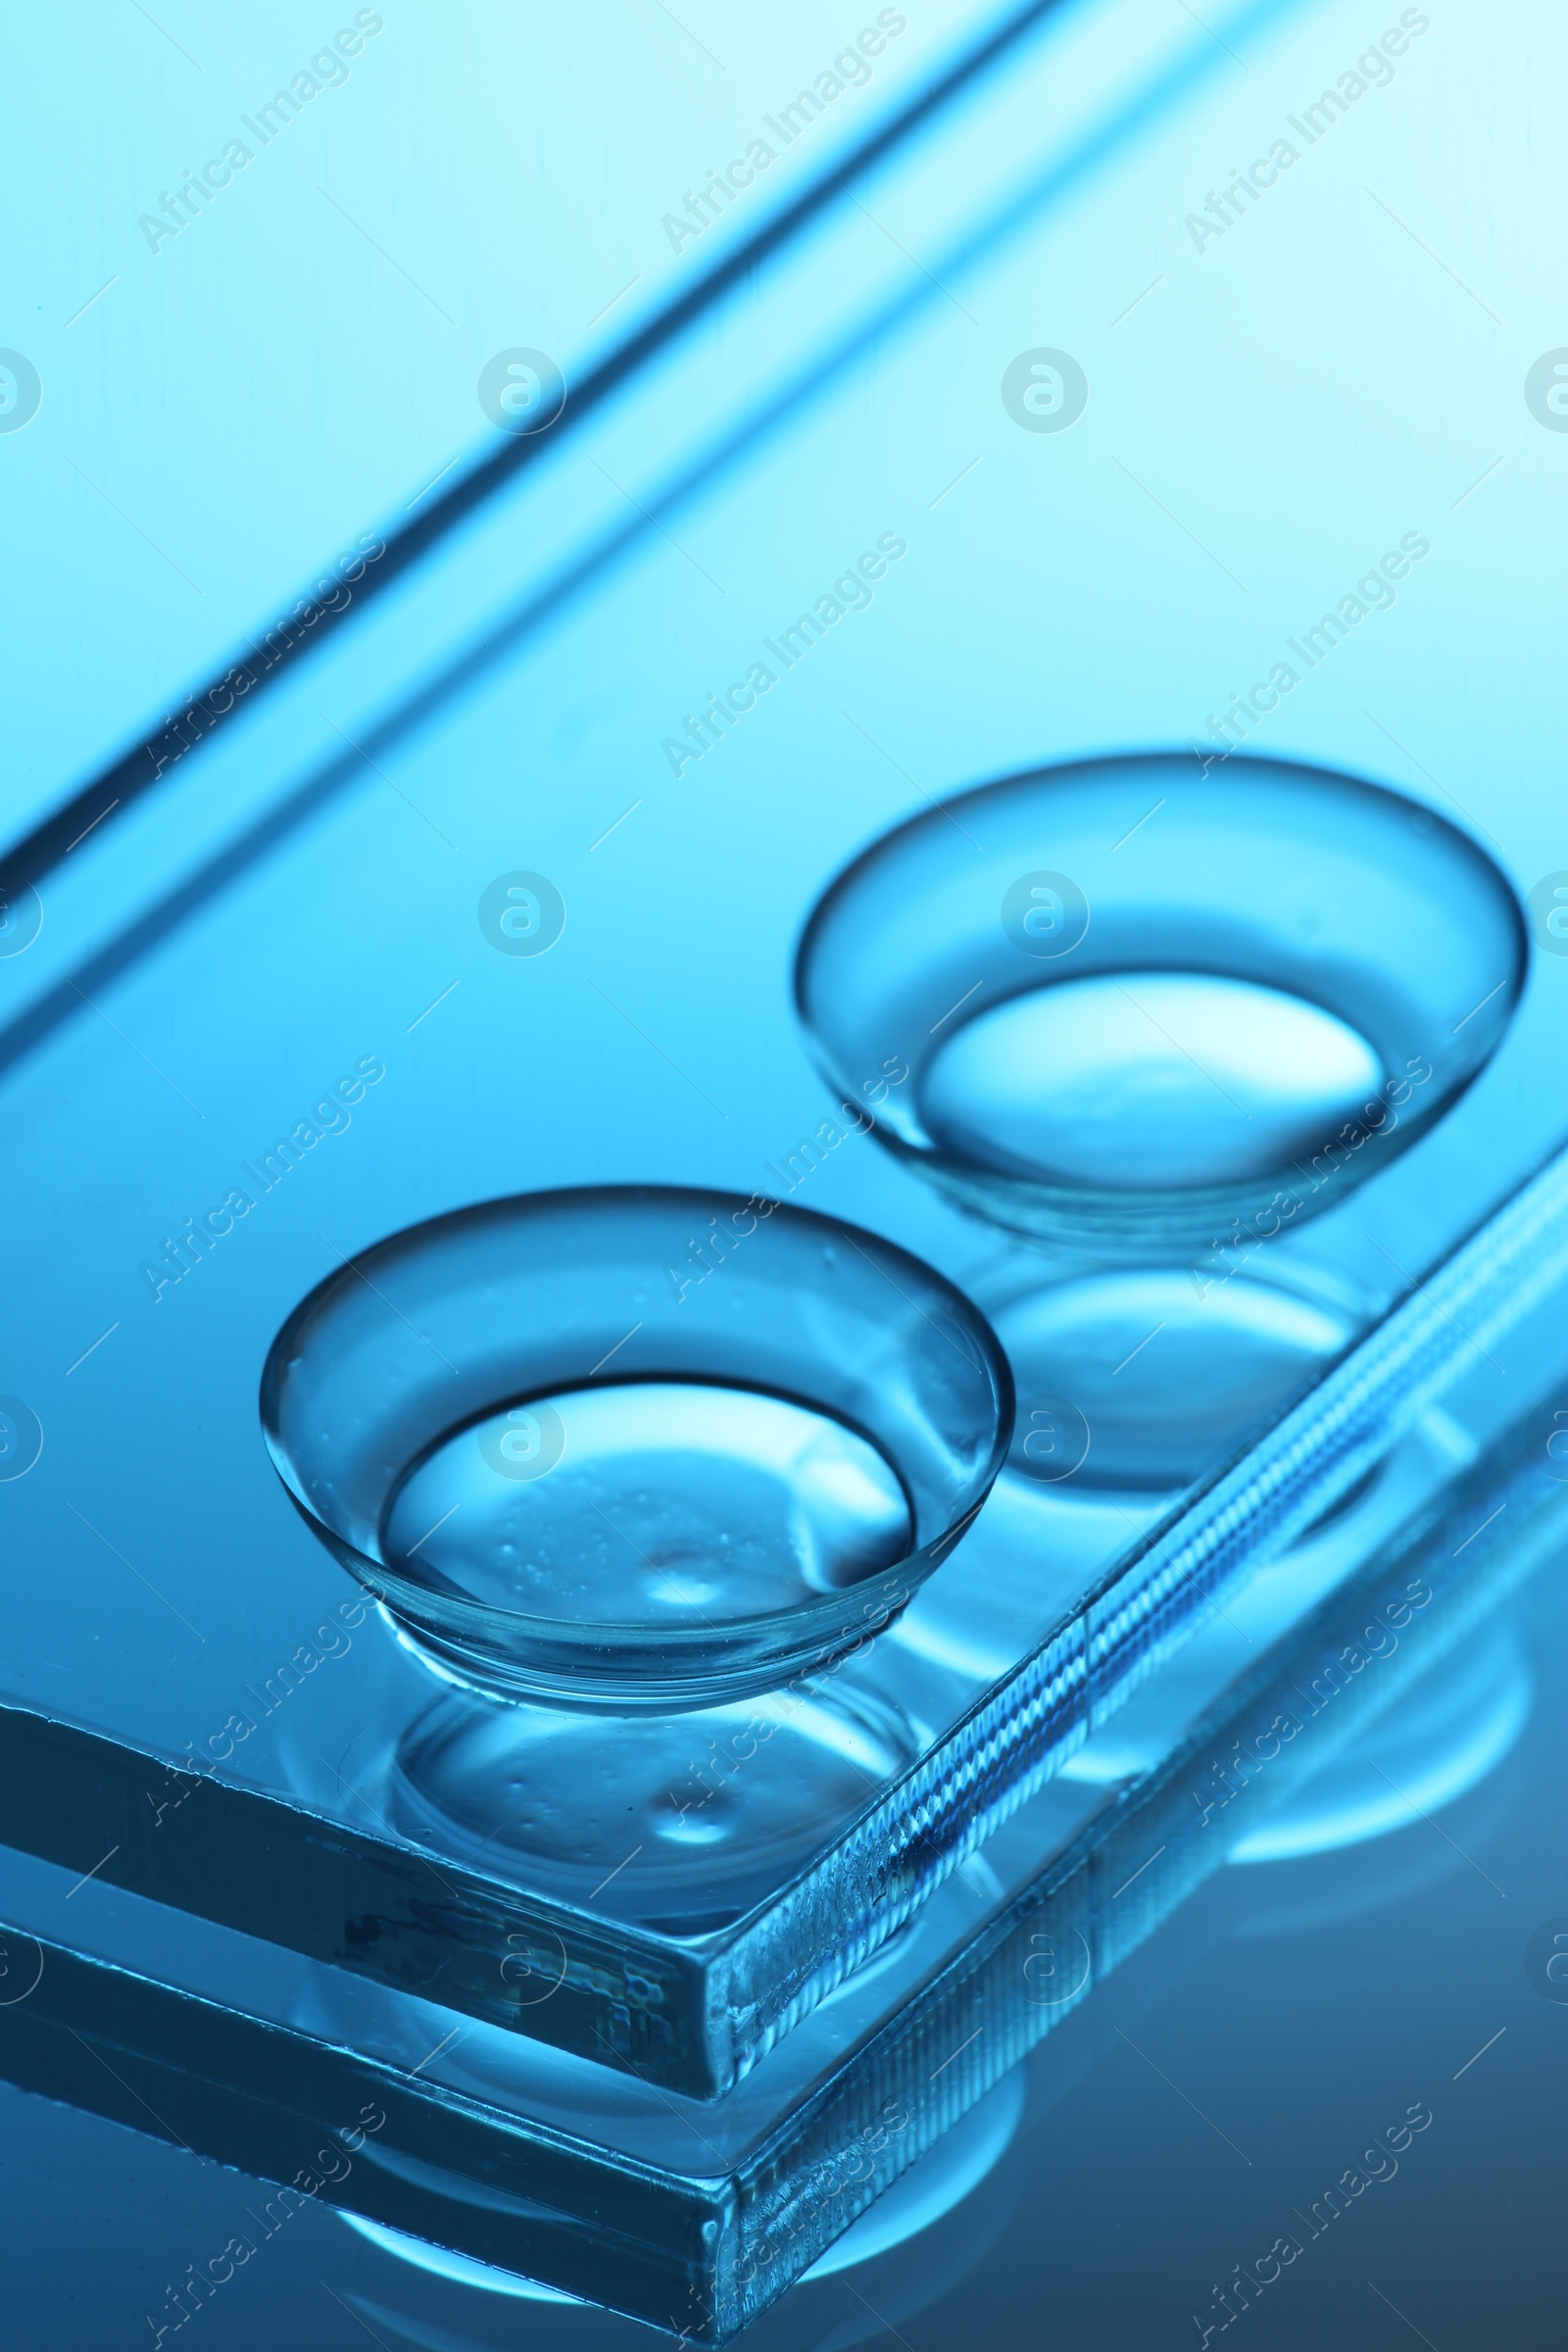 Photo of Pair of contact lenses and glass on mirror surface, closeup. Toned in blue